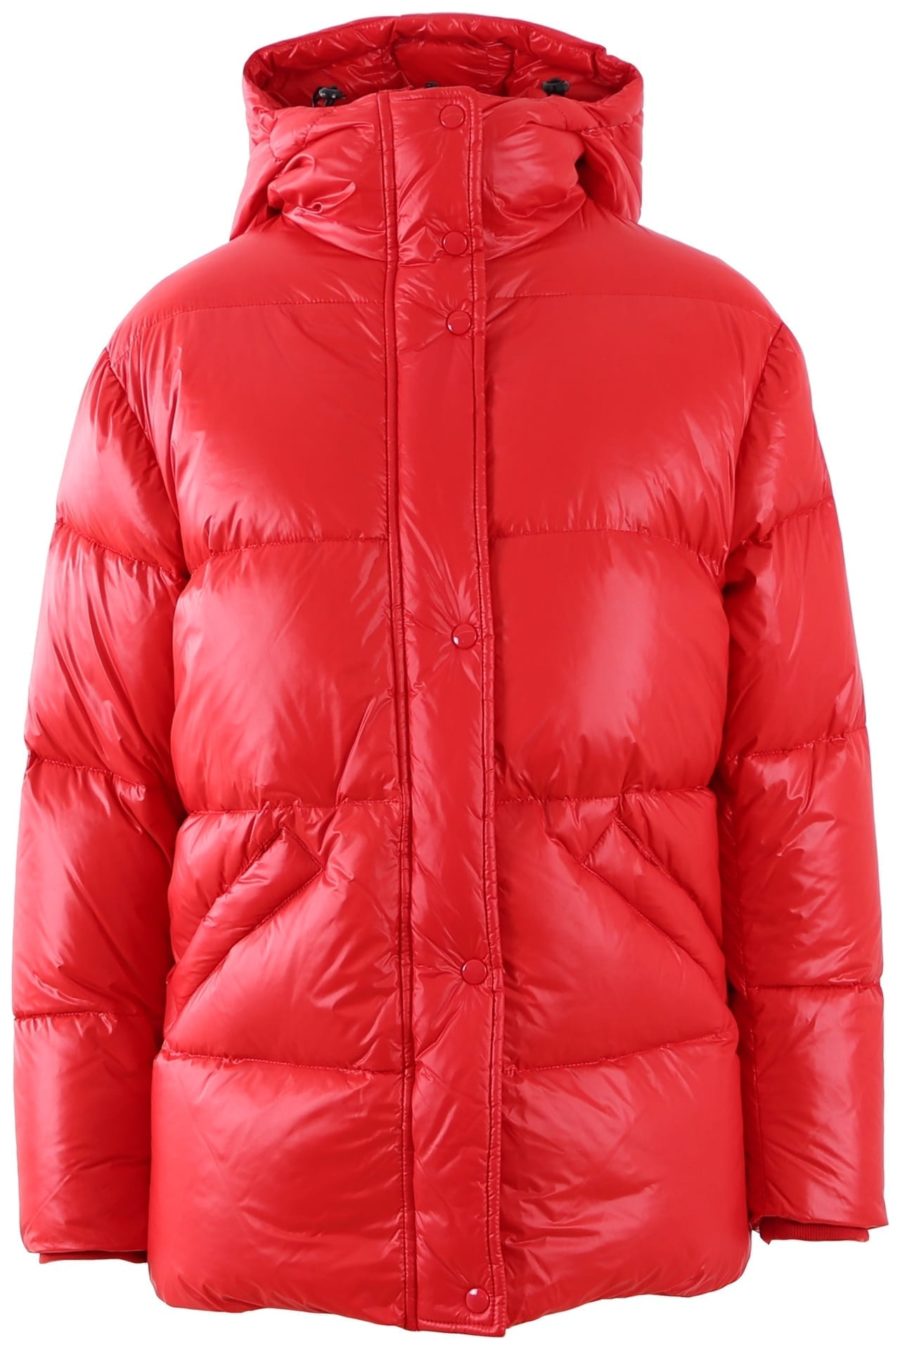 Blauer red hooded jacket with snap fastenings - 1e50a7c5b2d15fae5c28364f288632e353ea804e